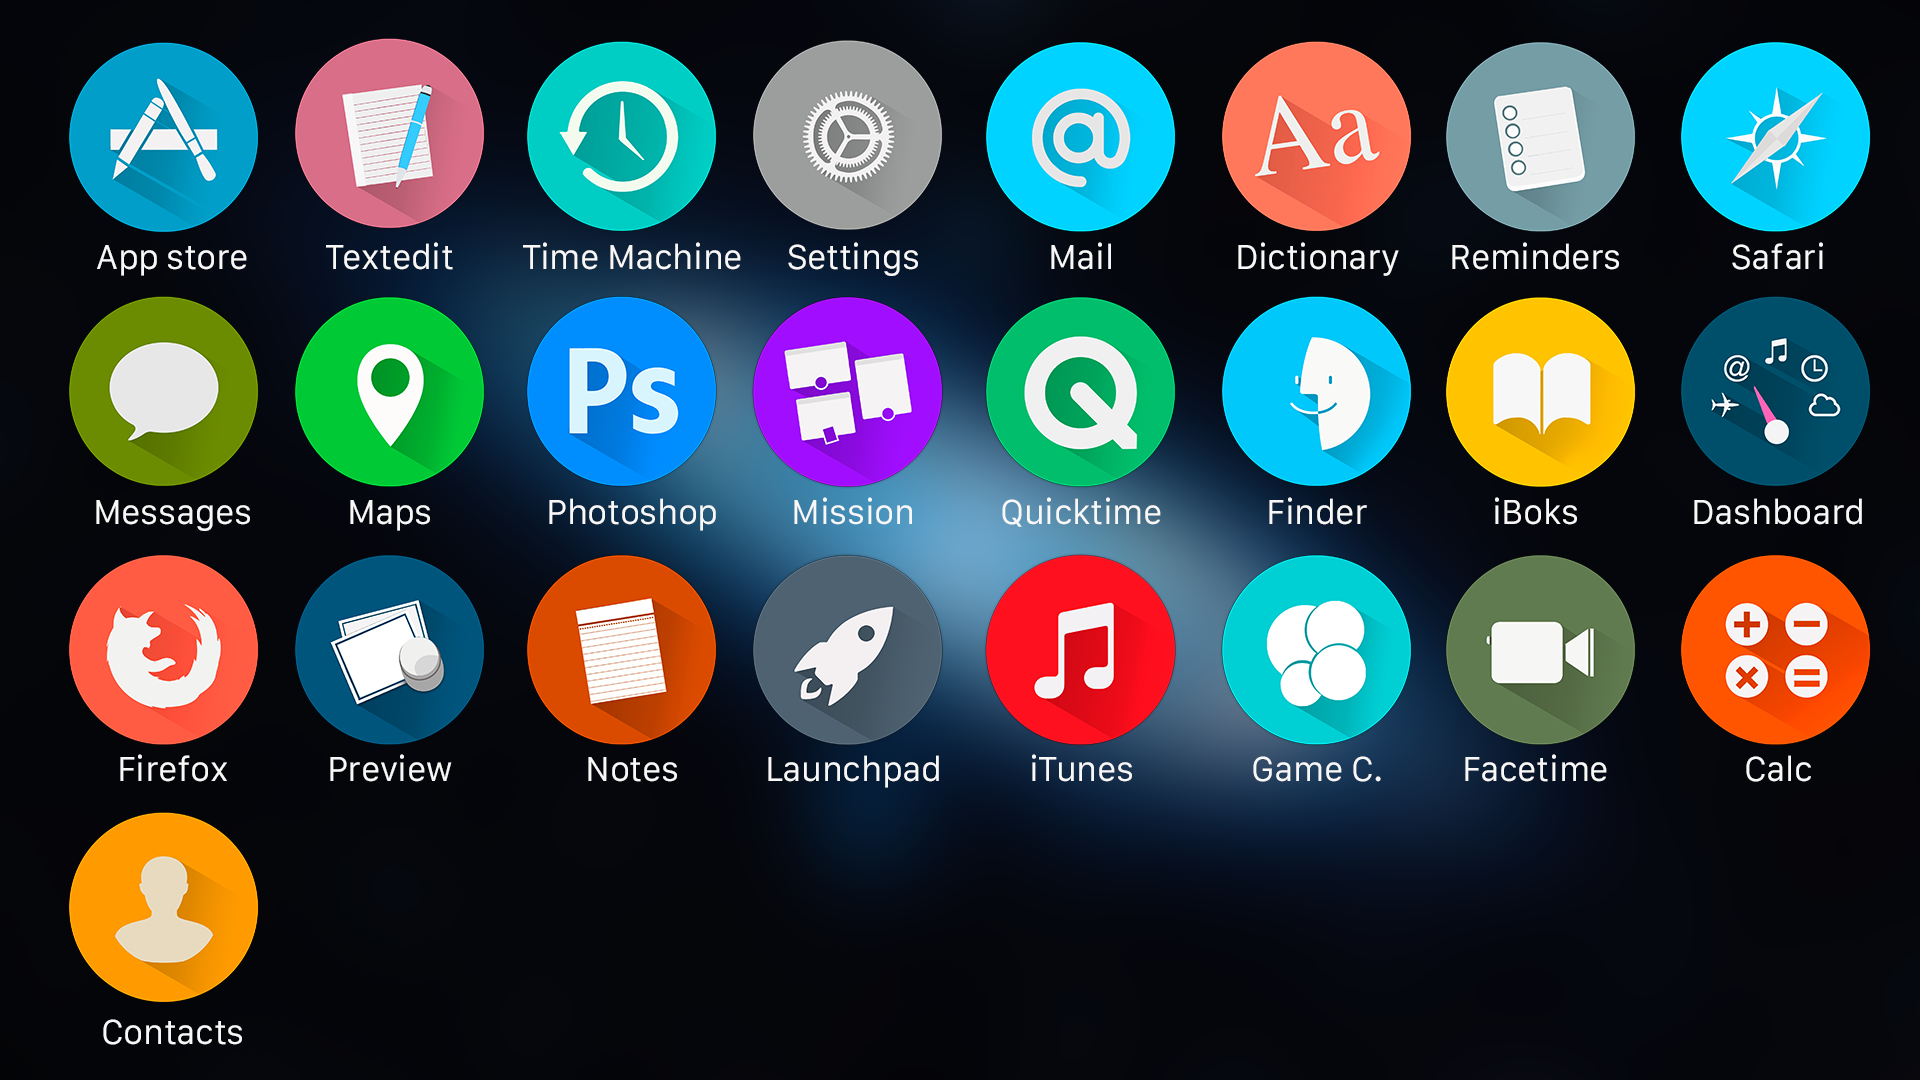 os_x_yosemite_icons_by_janosch500-d8ykln7.png